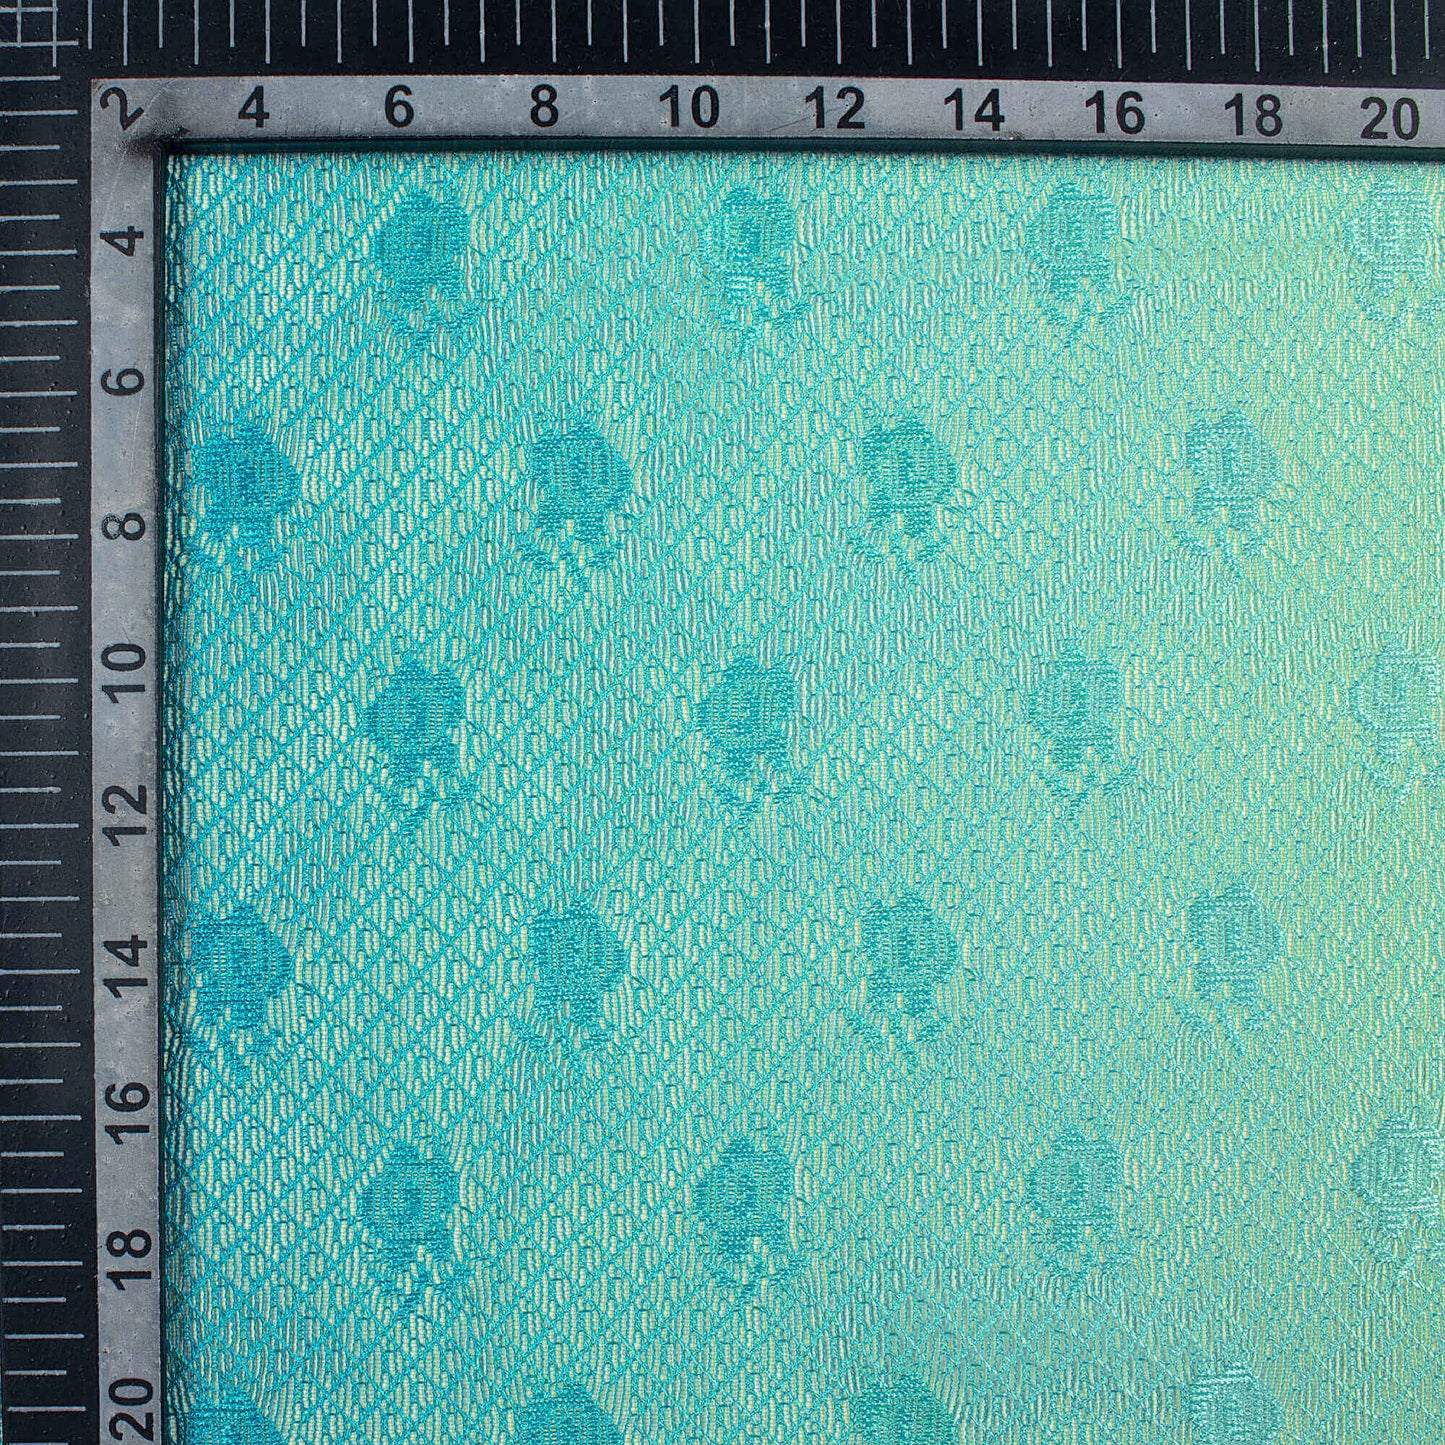 Teal Blue And Mint Green Ombre Pattern Digital Print Booti Raschel Net Fabric (Width 58 Inches)